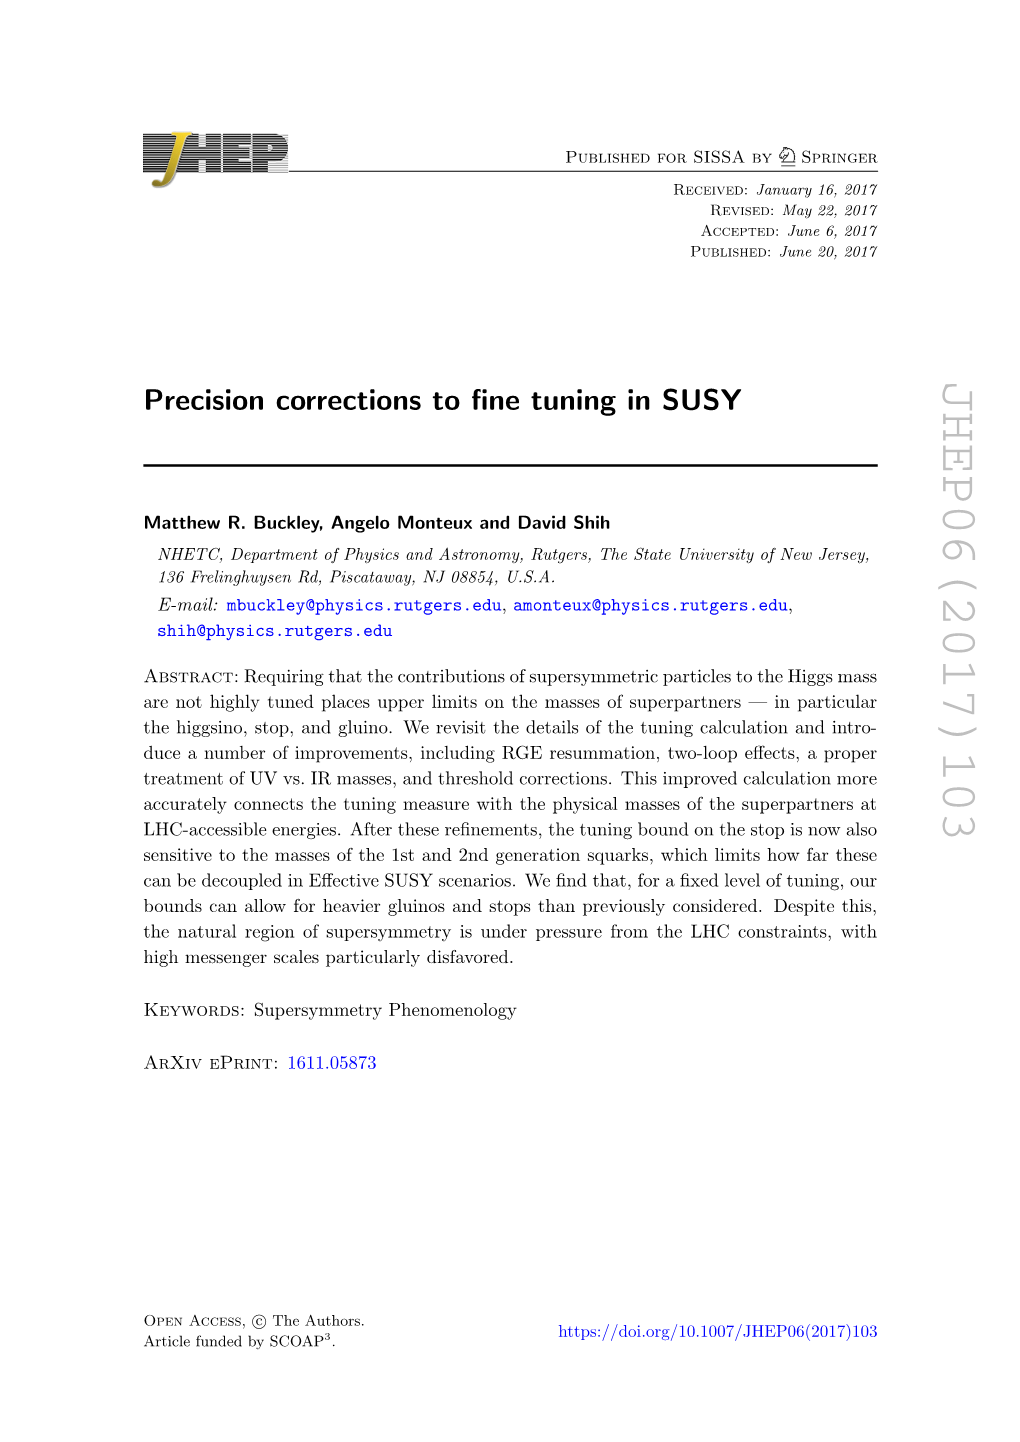 Precision Corrections to Fine Tuning in SUSY